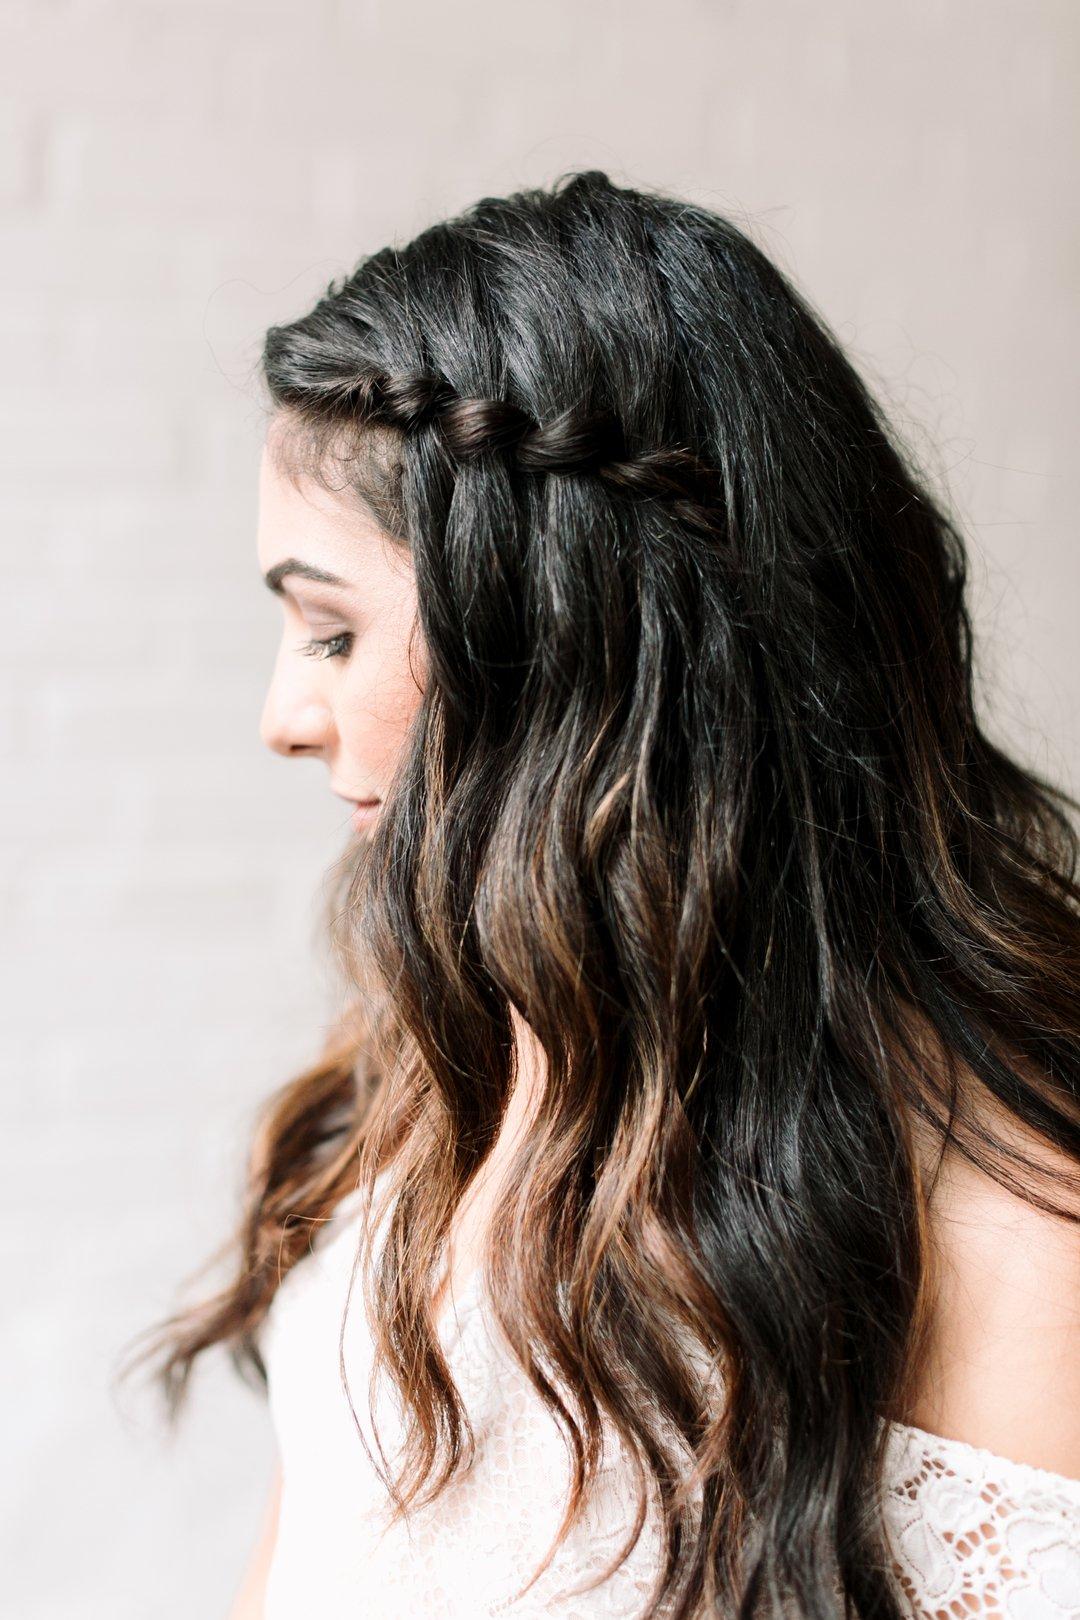 20 Summer Wedding Hairstyles to Keep You Cool & Chic